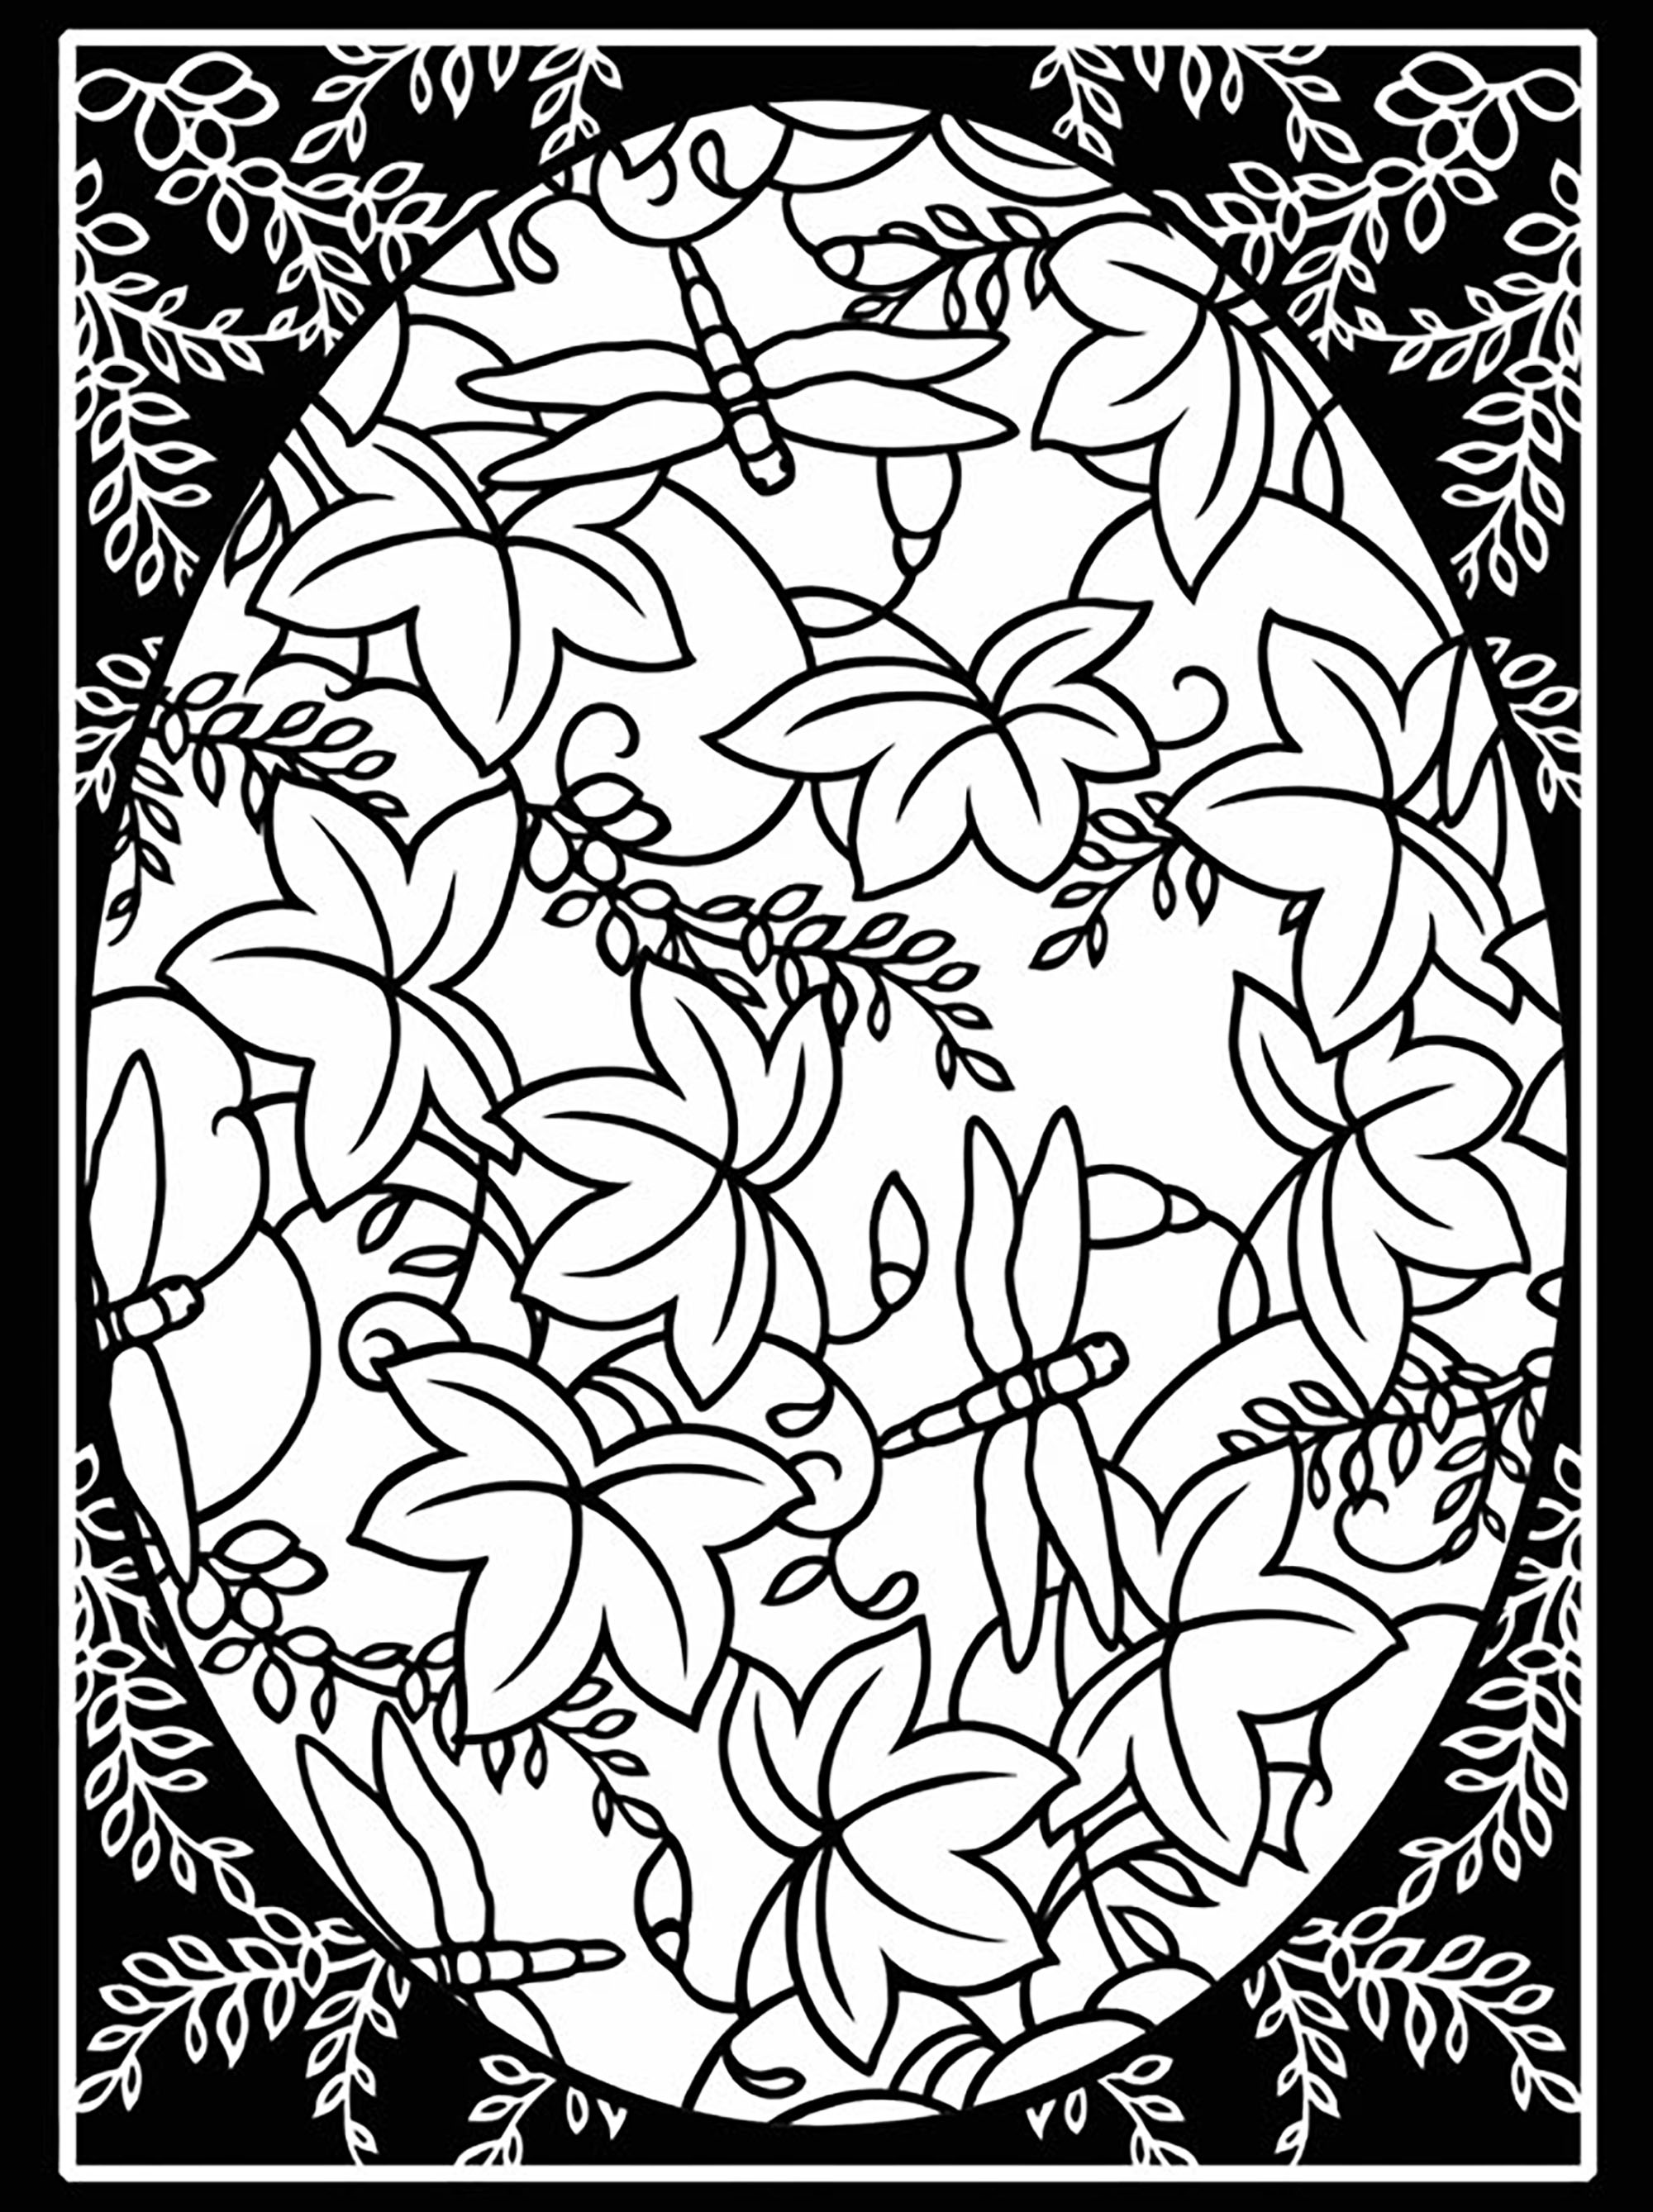 Easter egg with leaves and large border, Artist : Dover Publications   Source : doverpublications